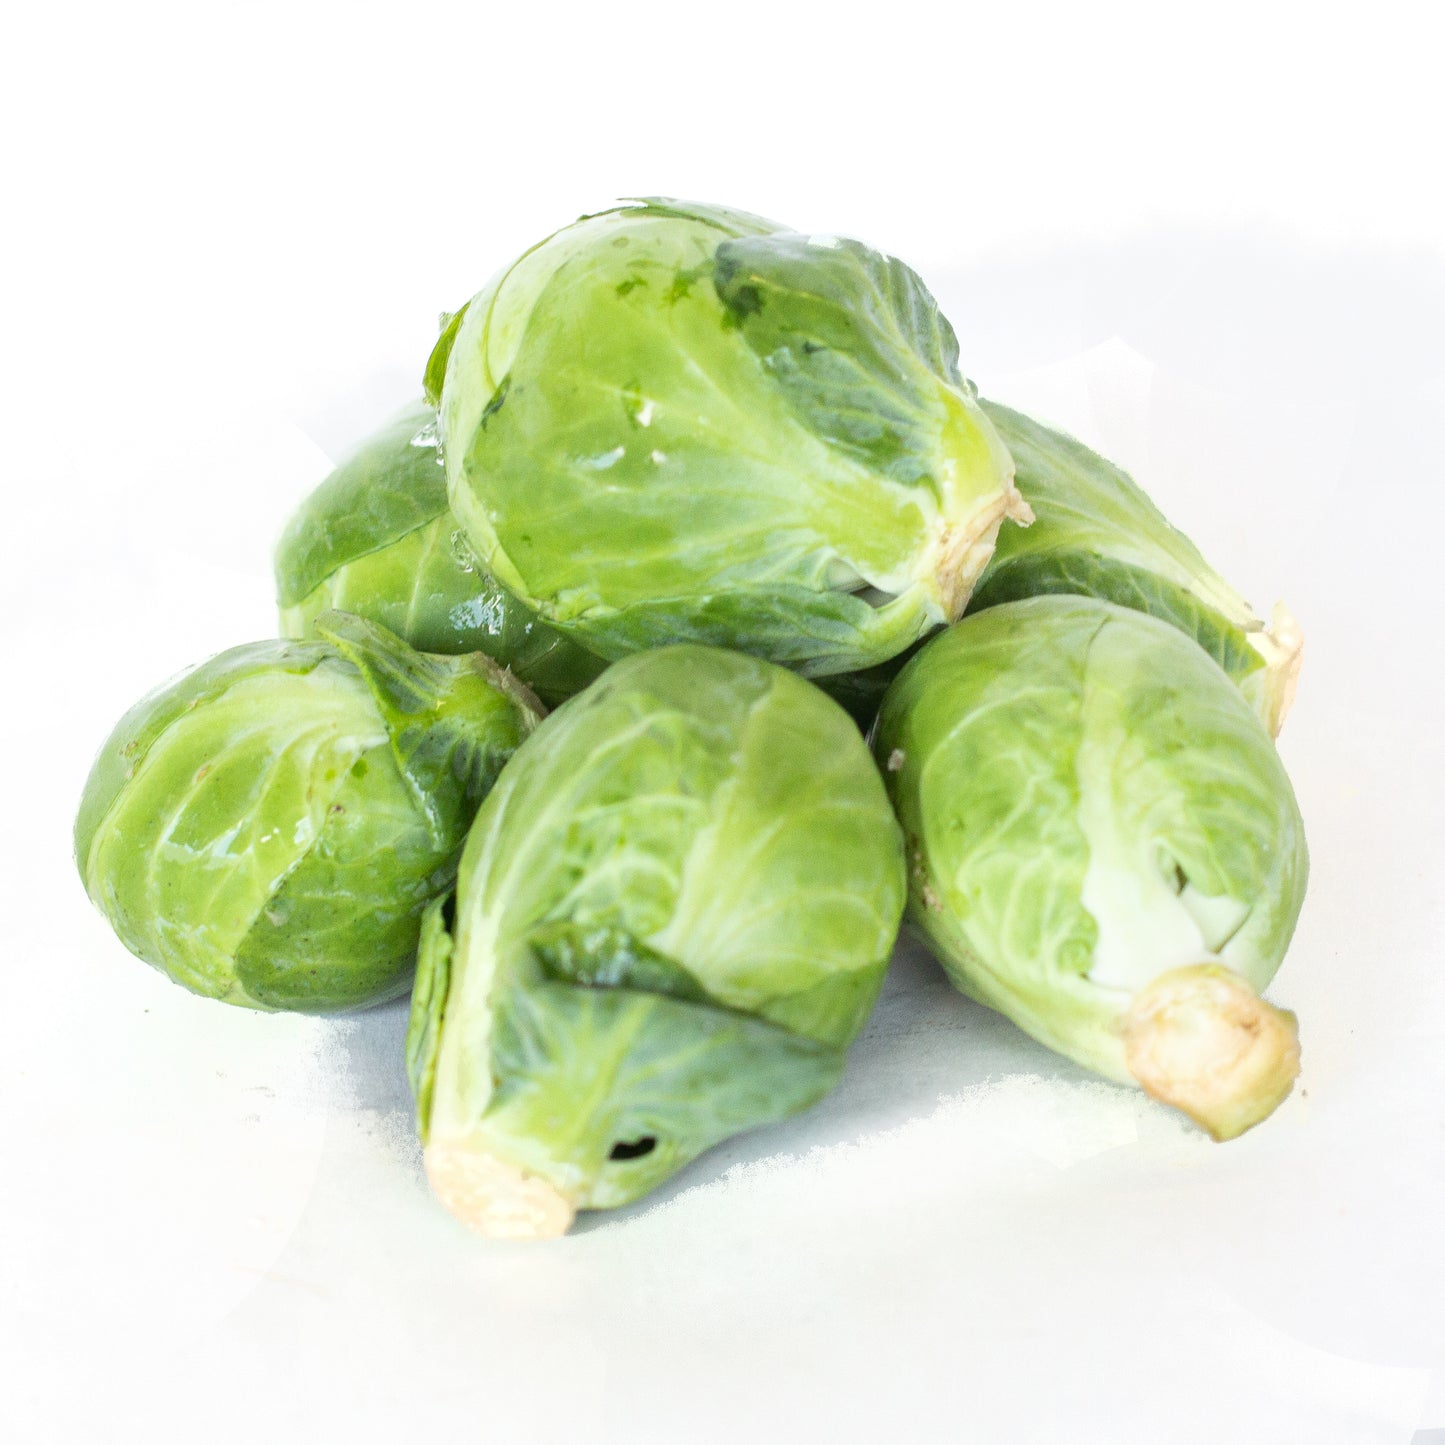 Brussel Sprouts 小包菜牙 (2 LB)